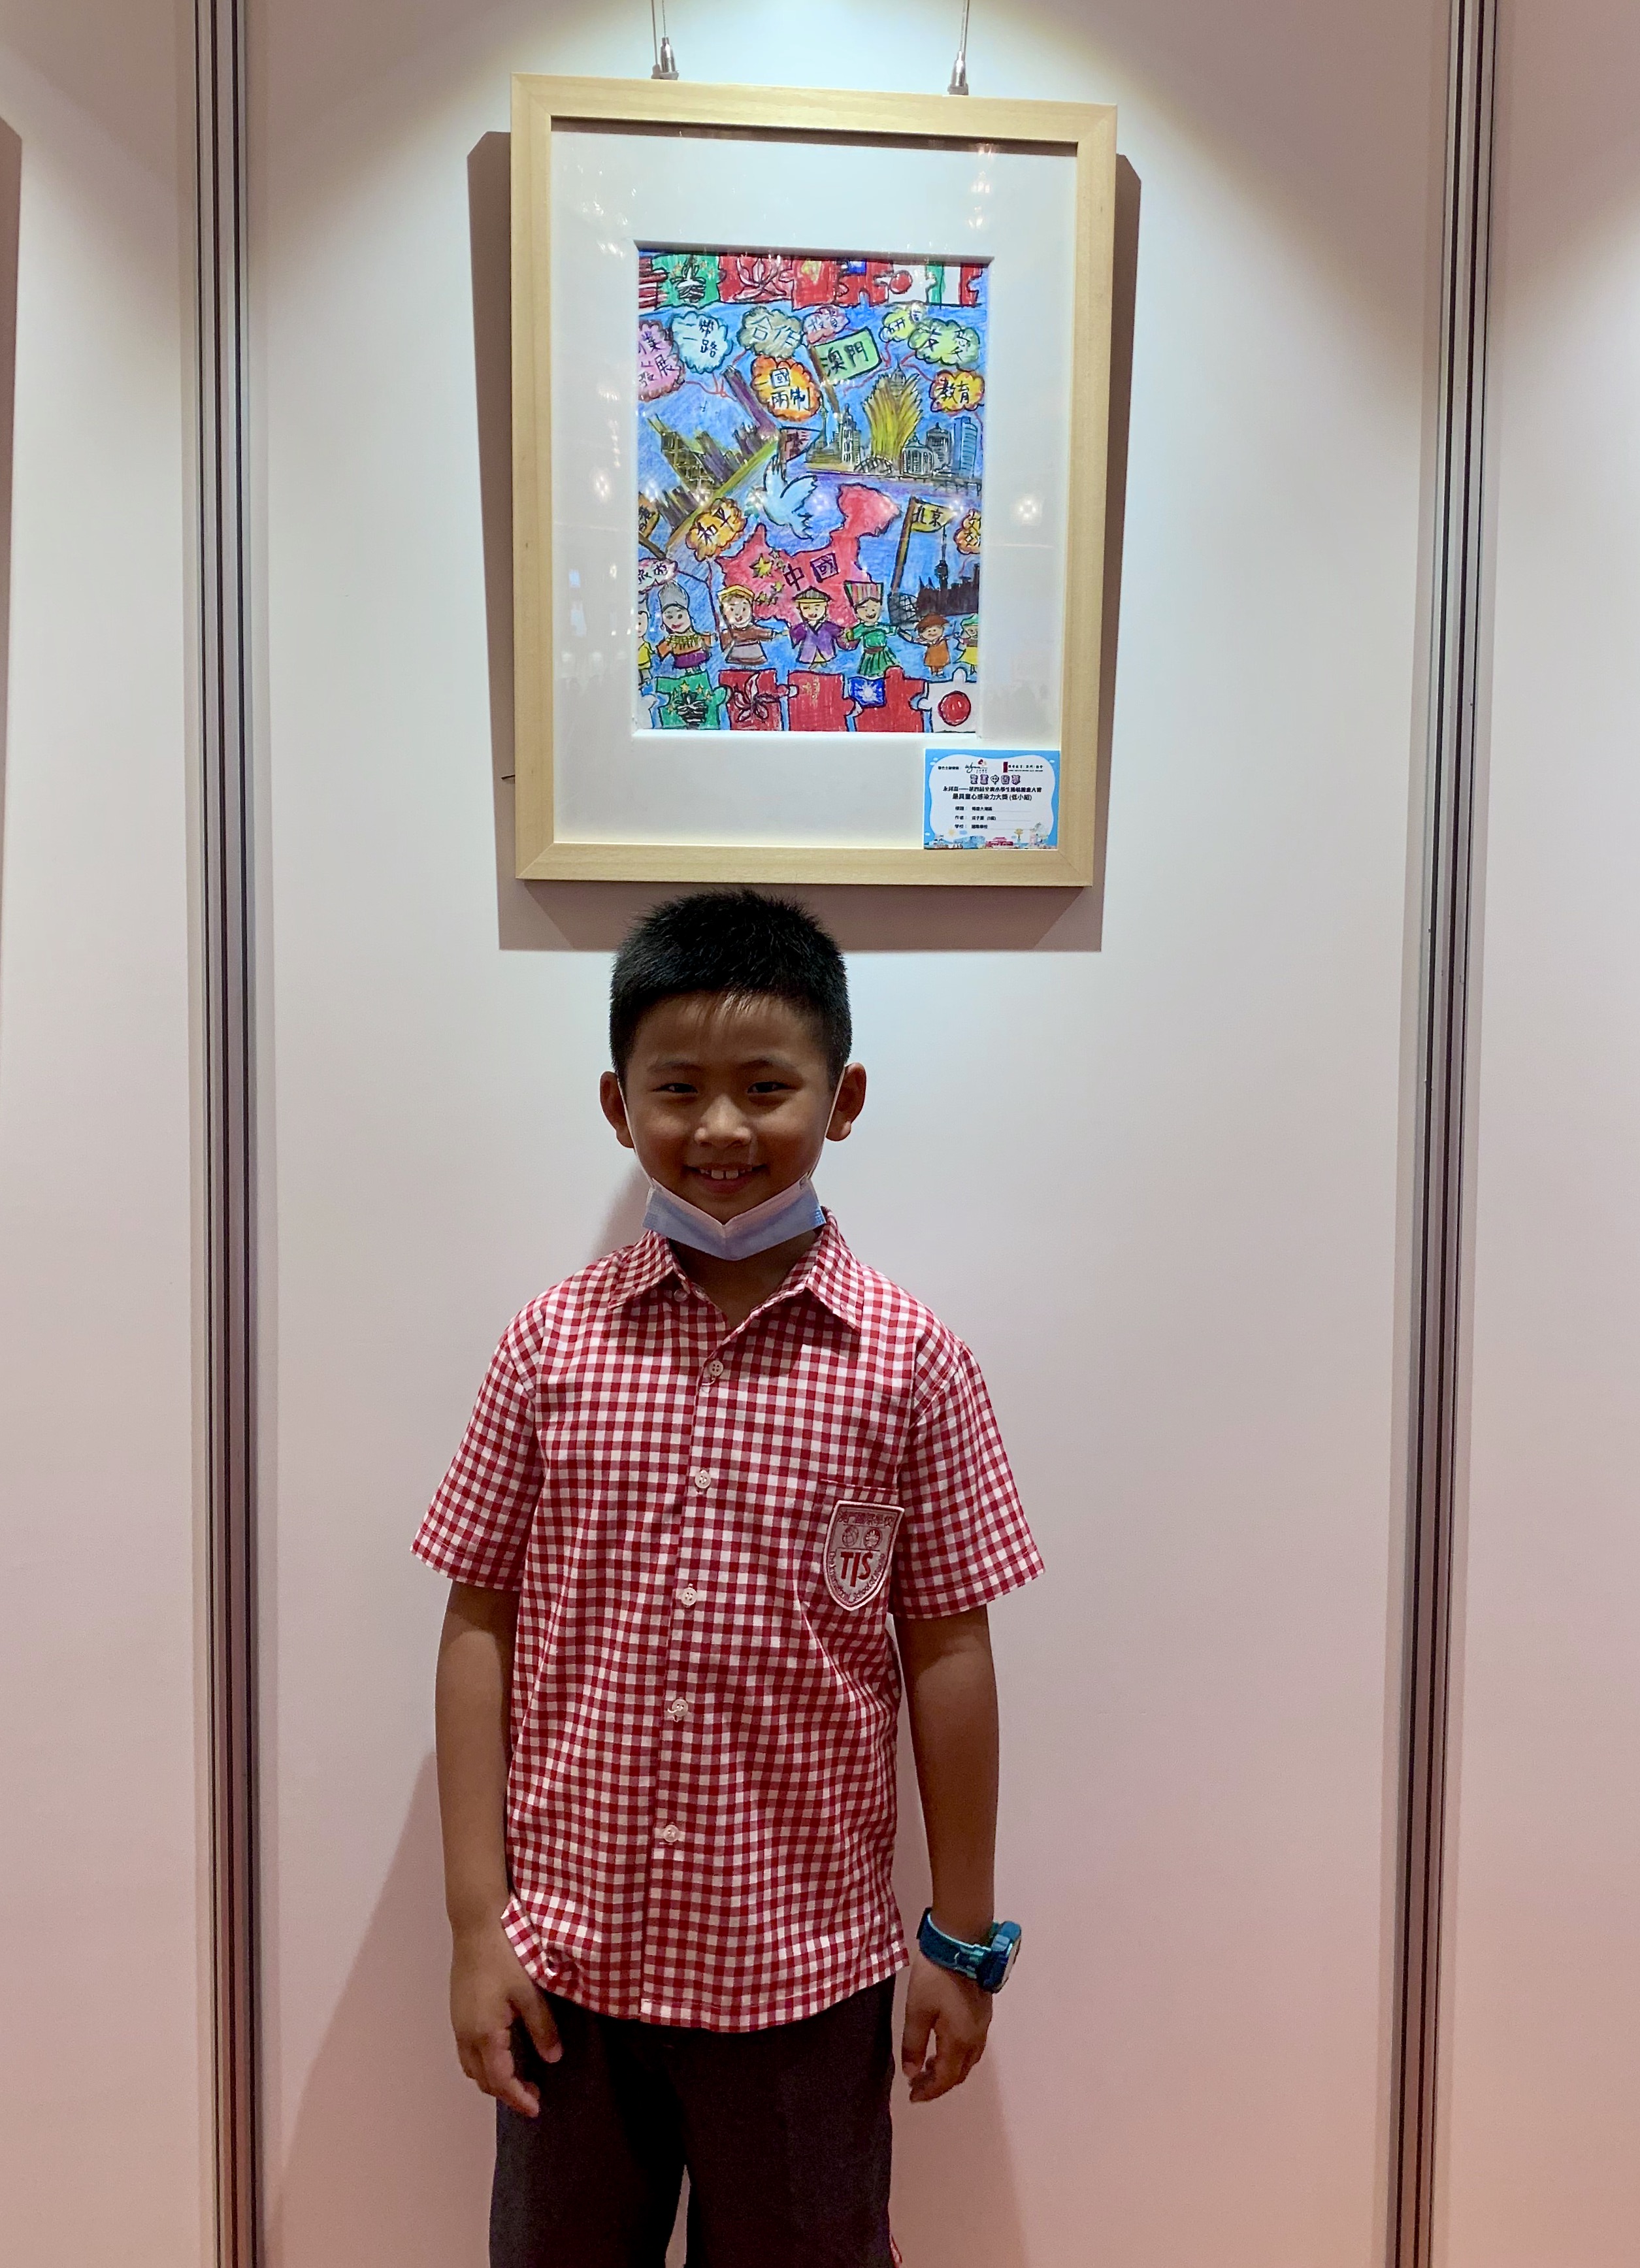 Miles with his winning artwork